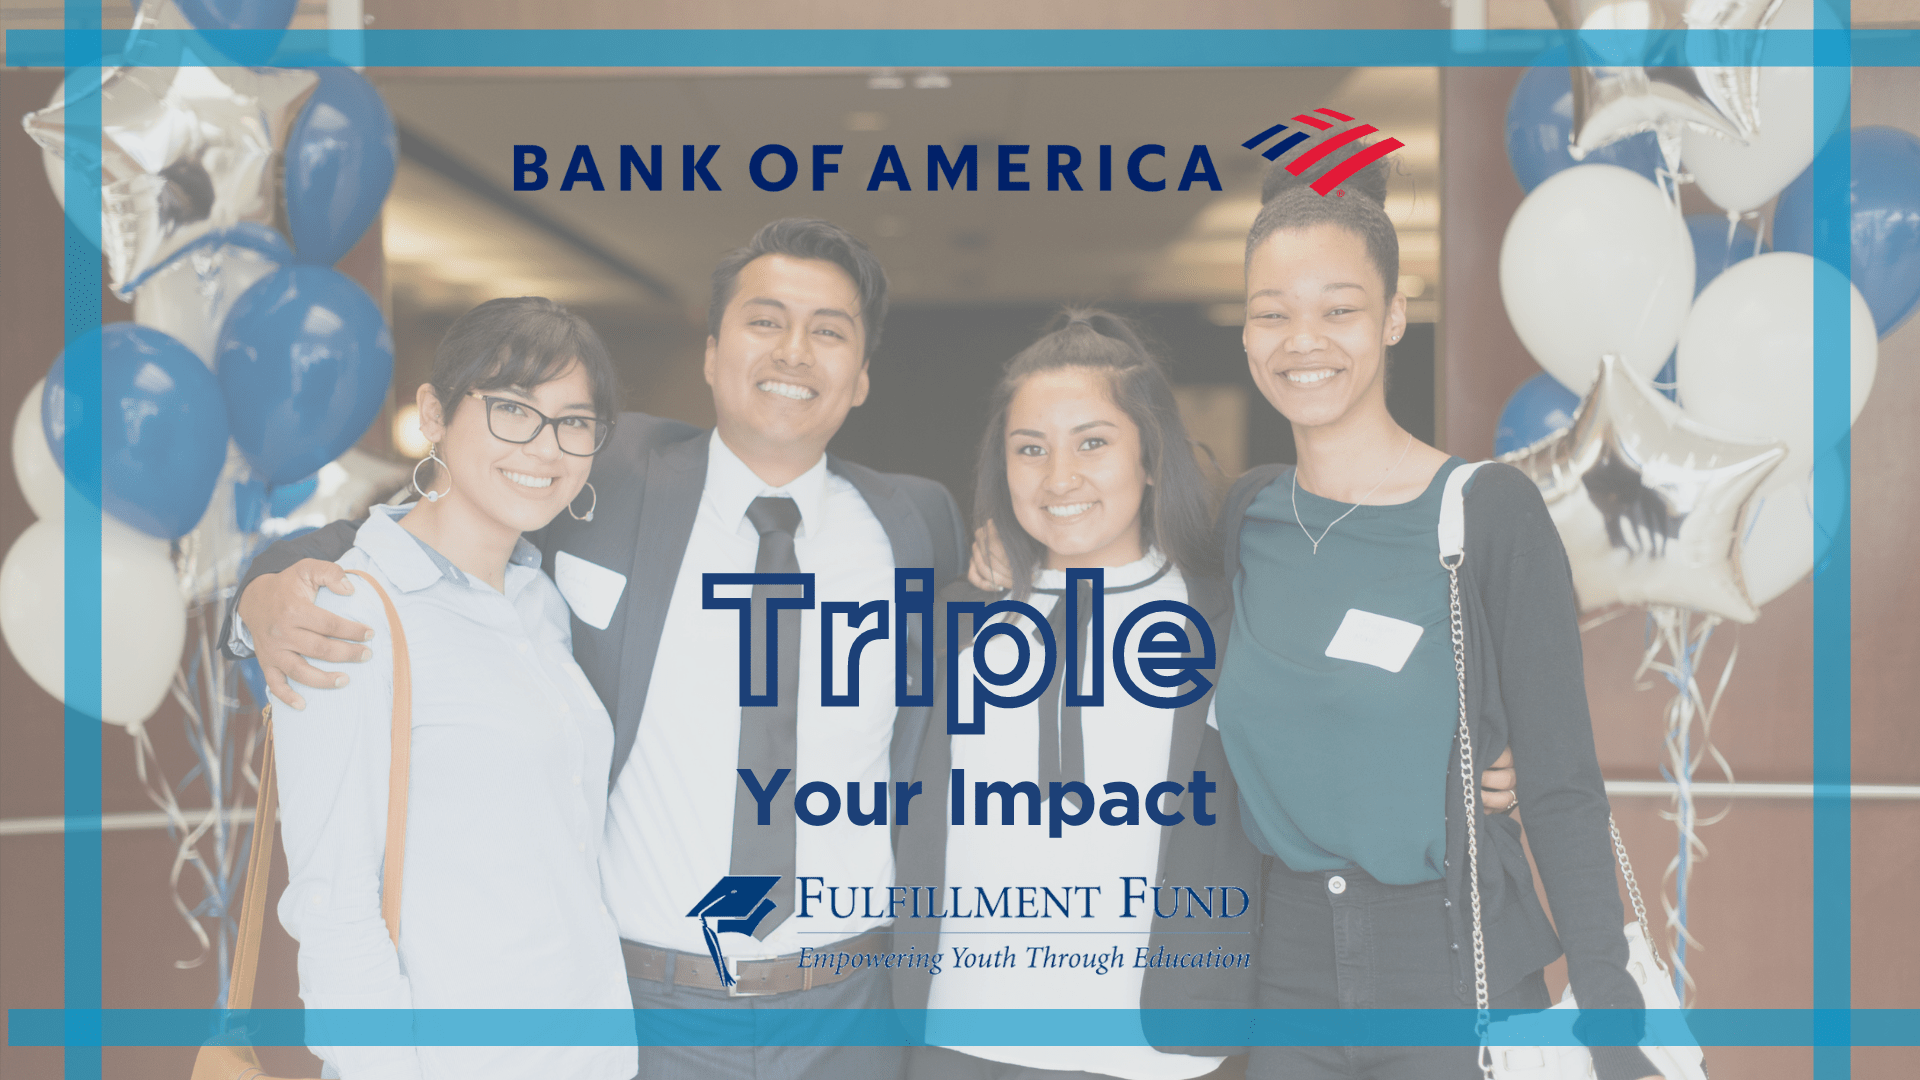 Triple your impact!